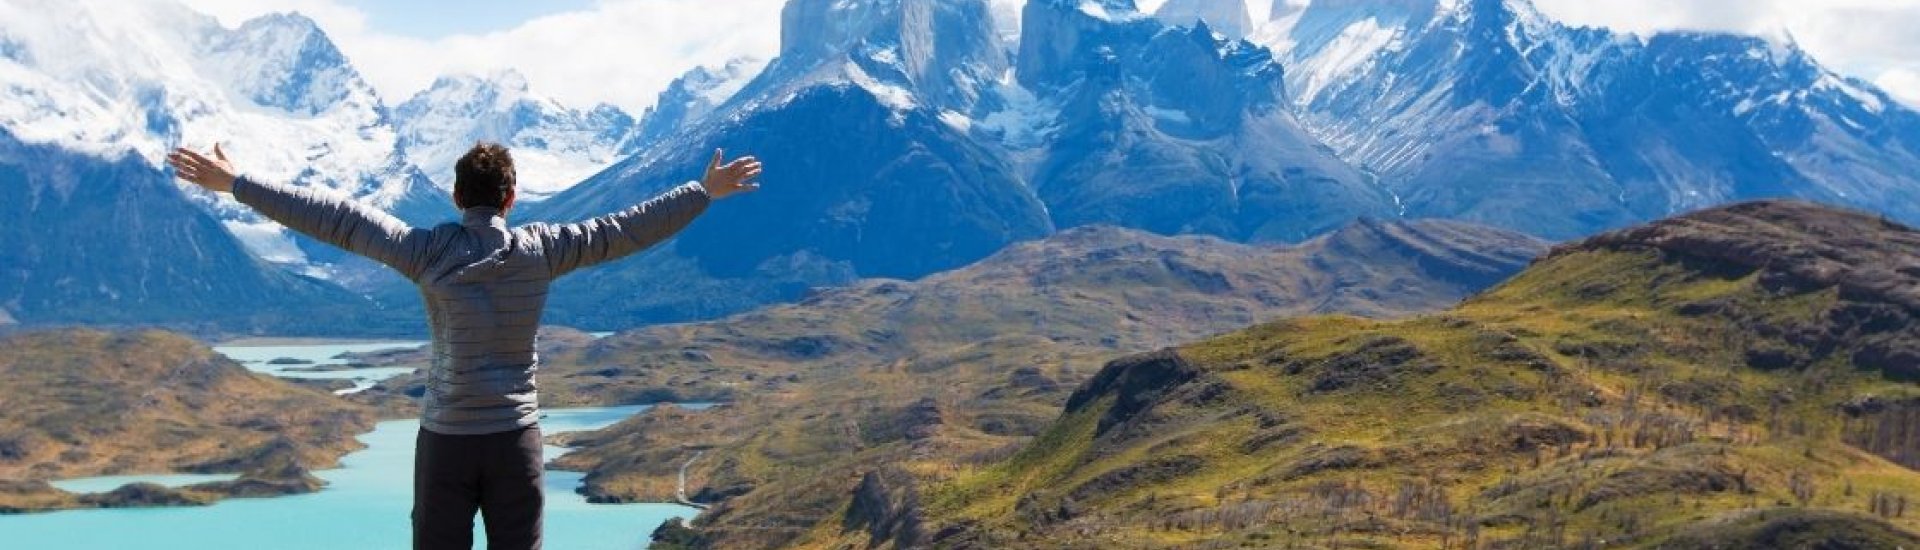 a person enjoying the view overlooking patagonia mountains